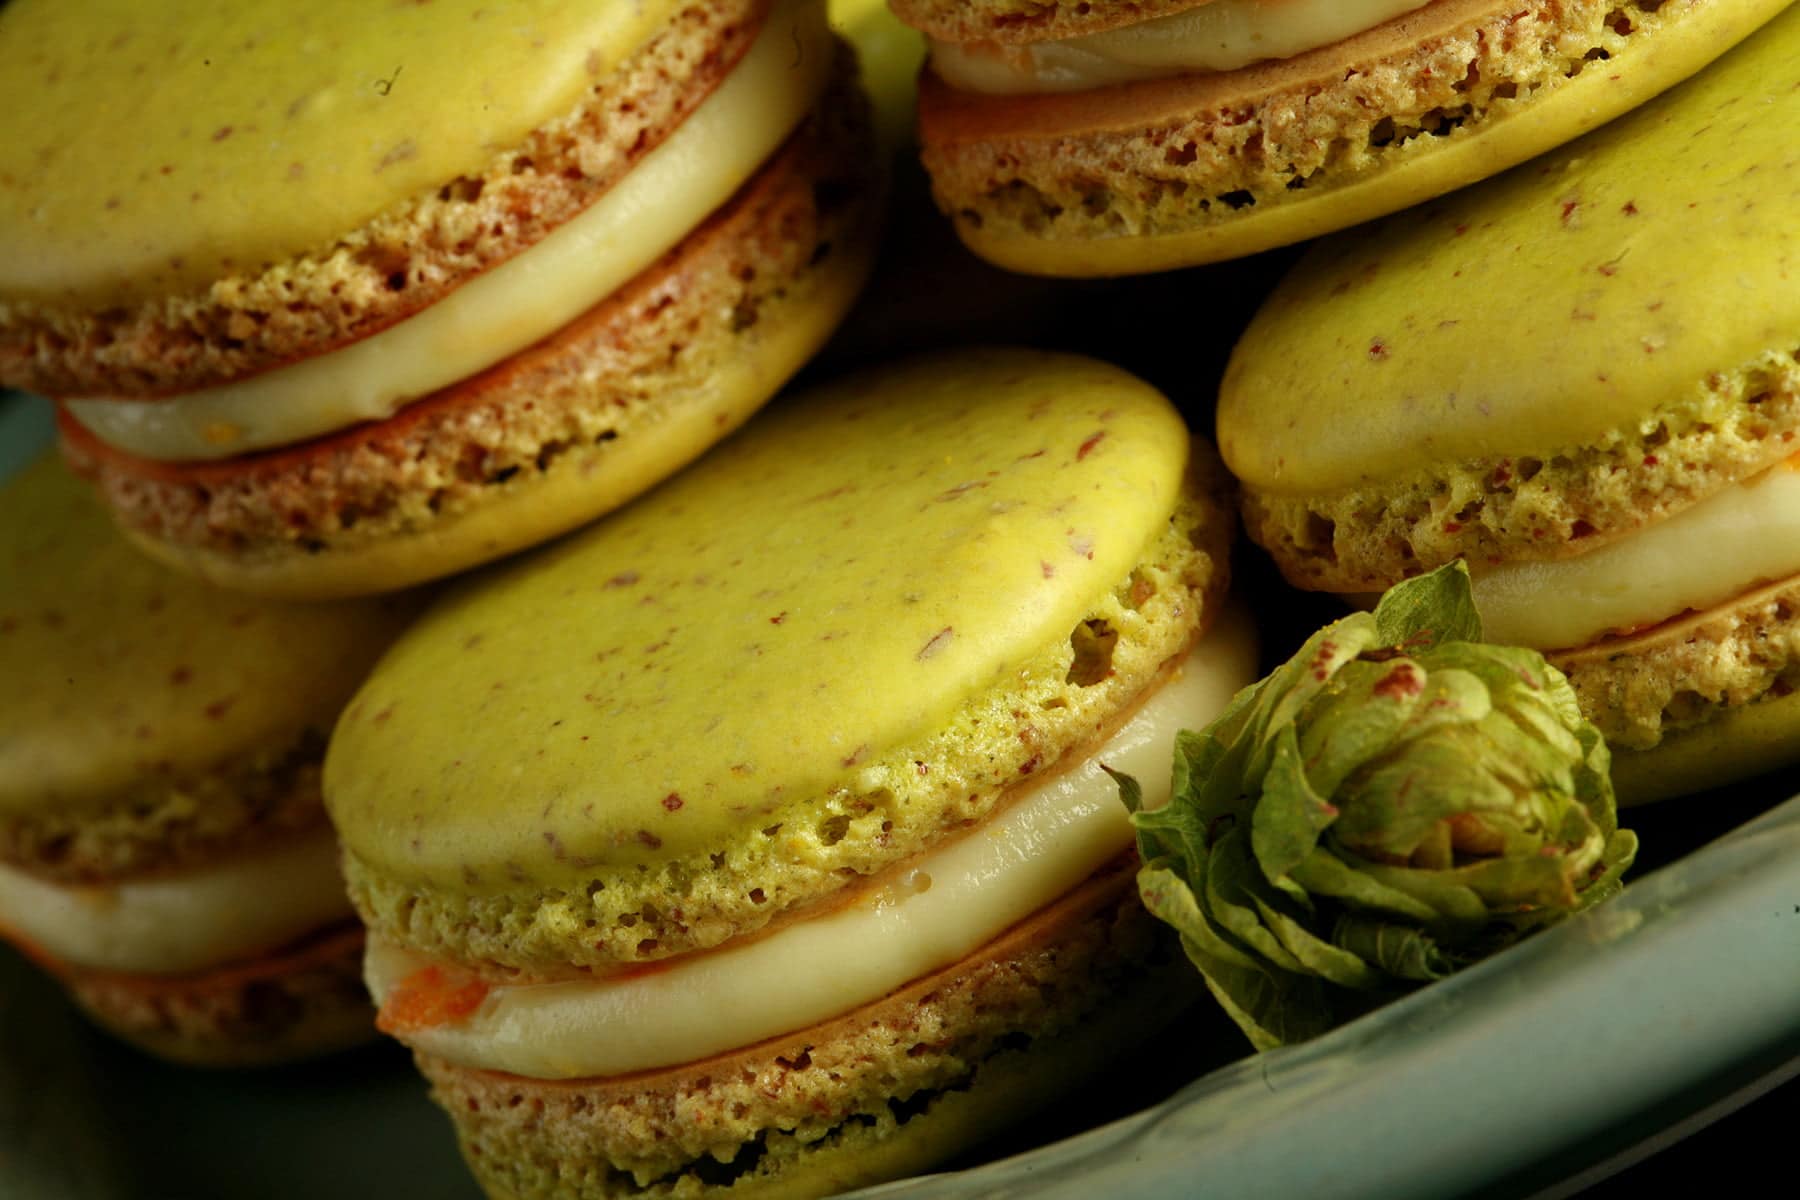 A small green plate is piled high with bright lime green Citrus Hop Macarons. There is a fresh hop flower on the plate, and bits of orange zest visible in the filling of the macarons.